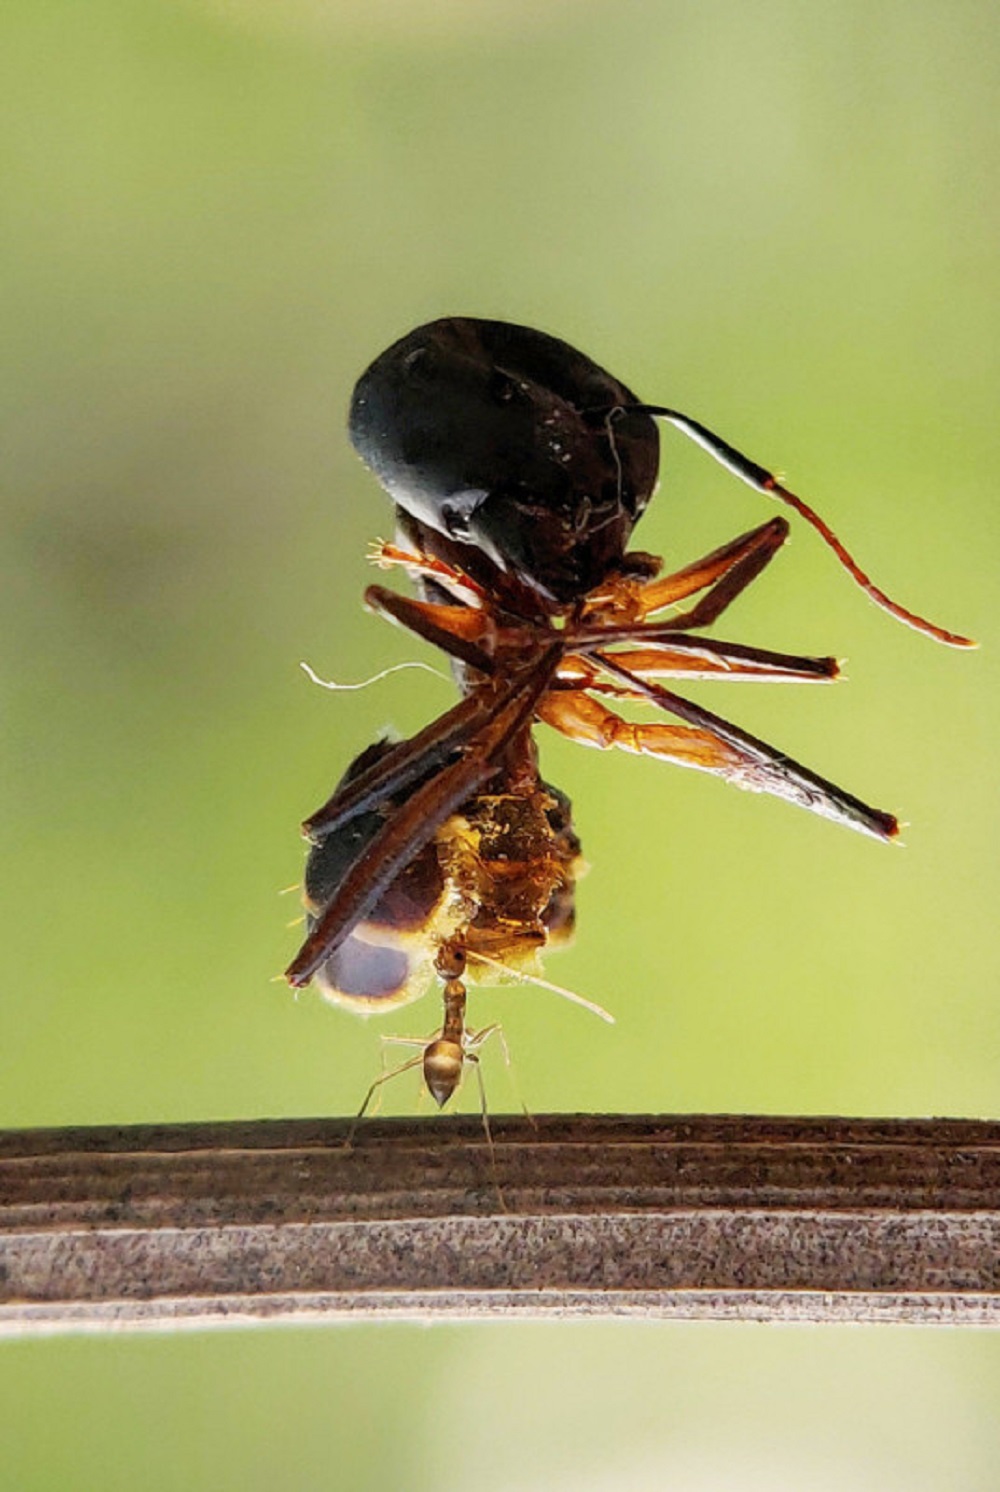 An ant carries a dead spider 7 times its weight